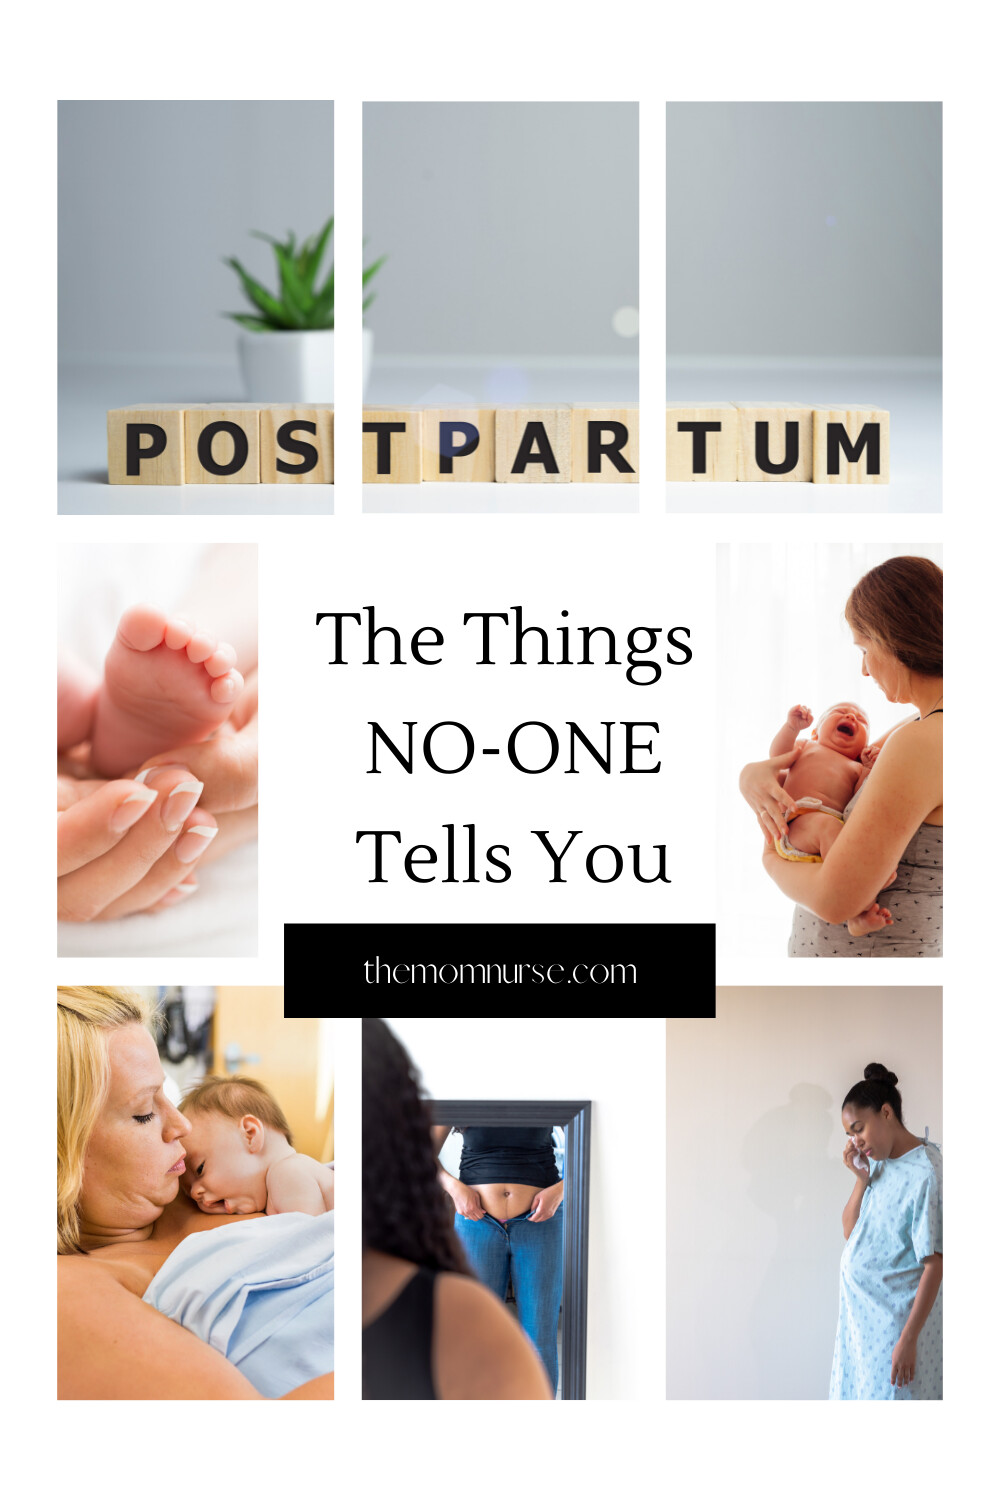 Postpartum Recovery and the Things NO-ONE tells you about as a New Mom